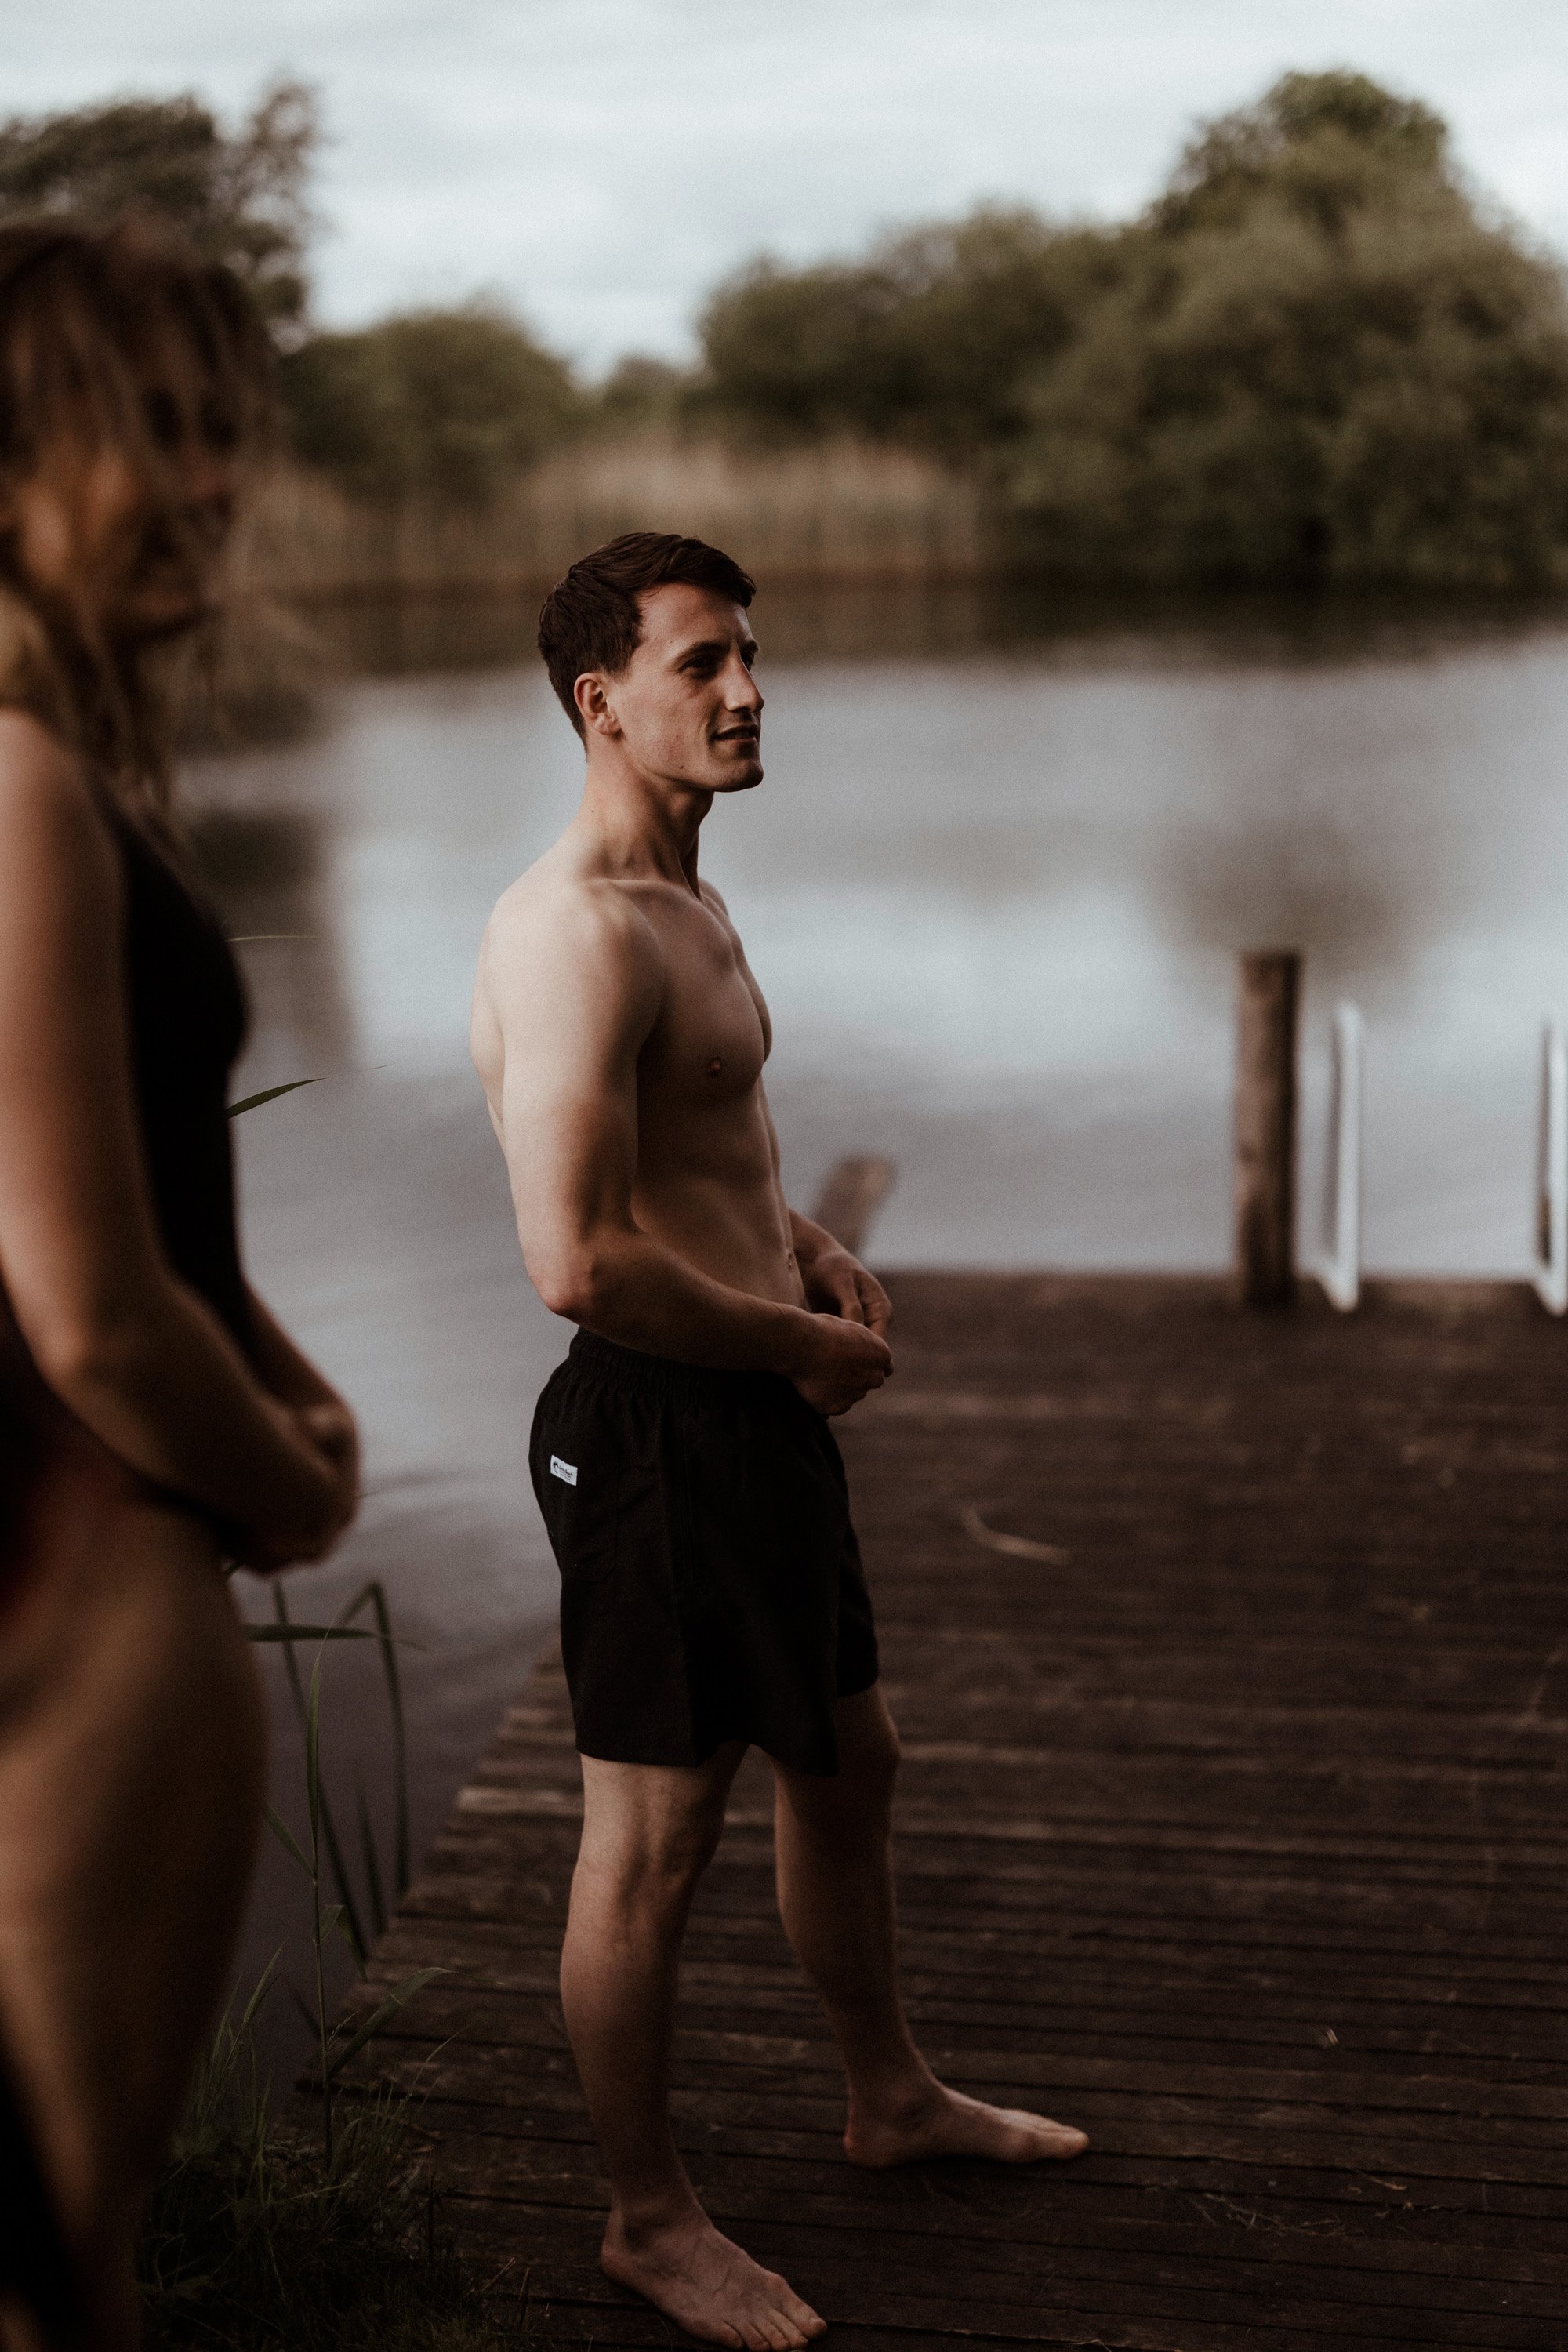 Bride and groom prepare for wild swim on their wedding day at rewilding wedding venue elmore court in Gloucester UK